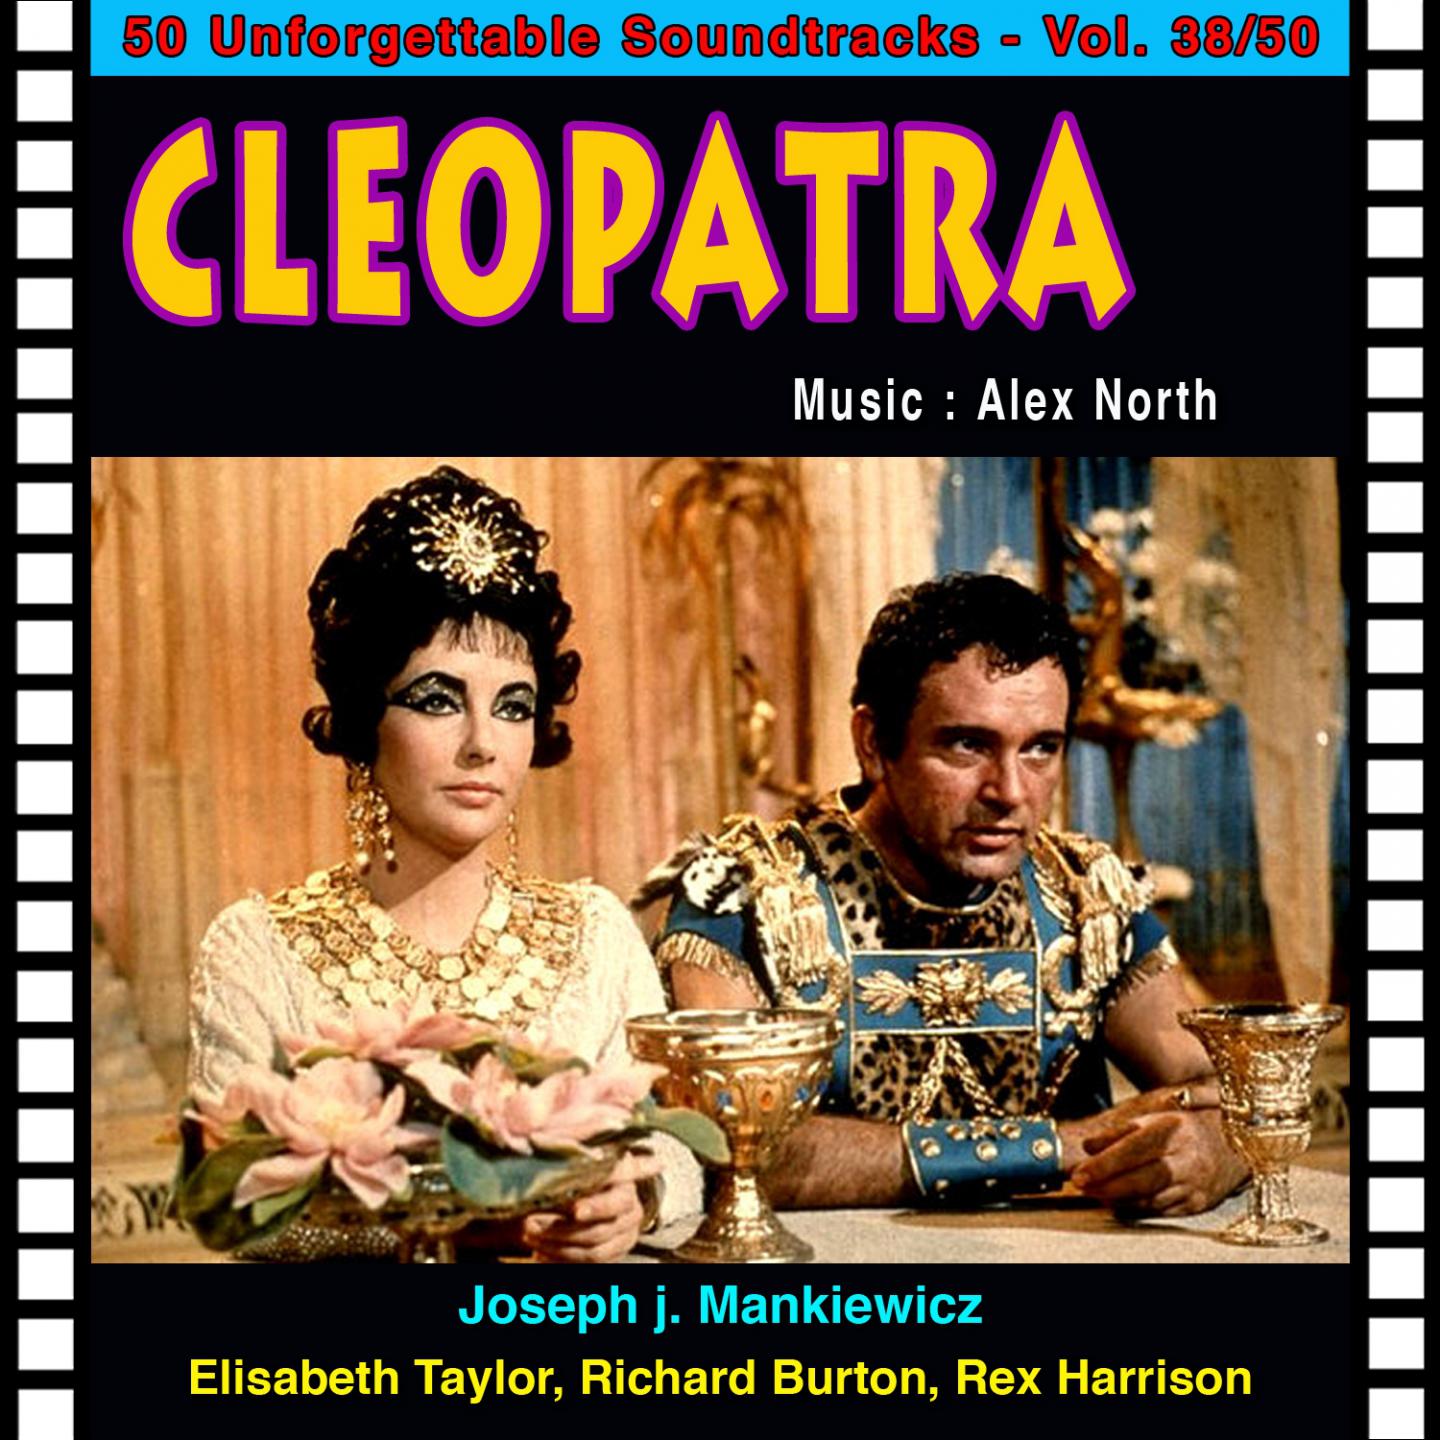 Grand Me an Honorable Way to Die Cle opatre  Cleopatra